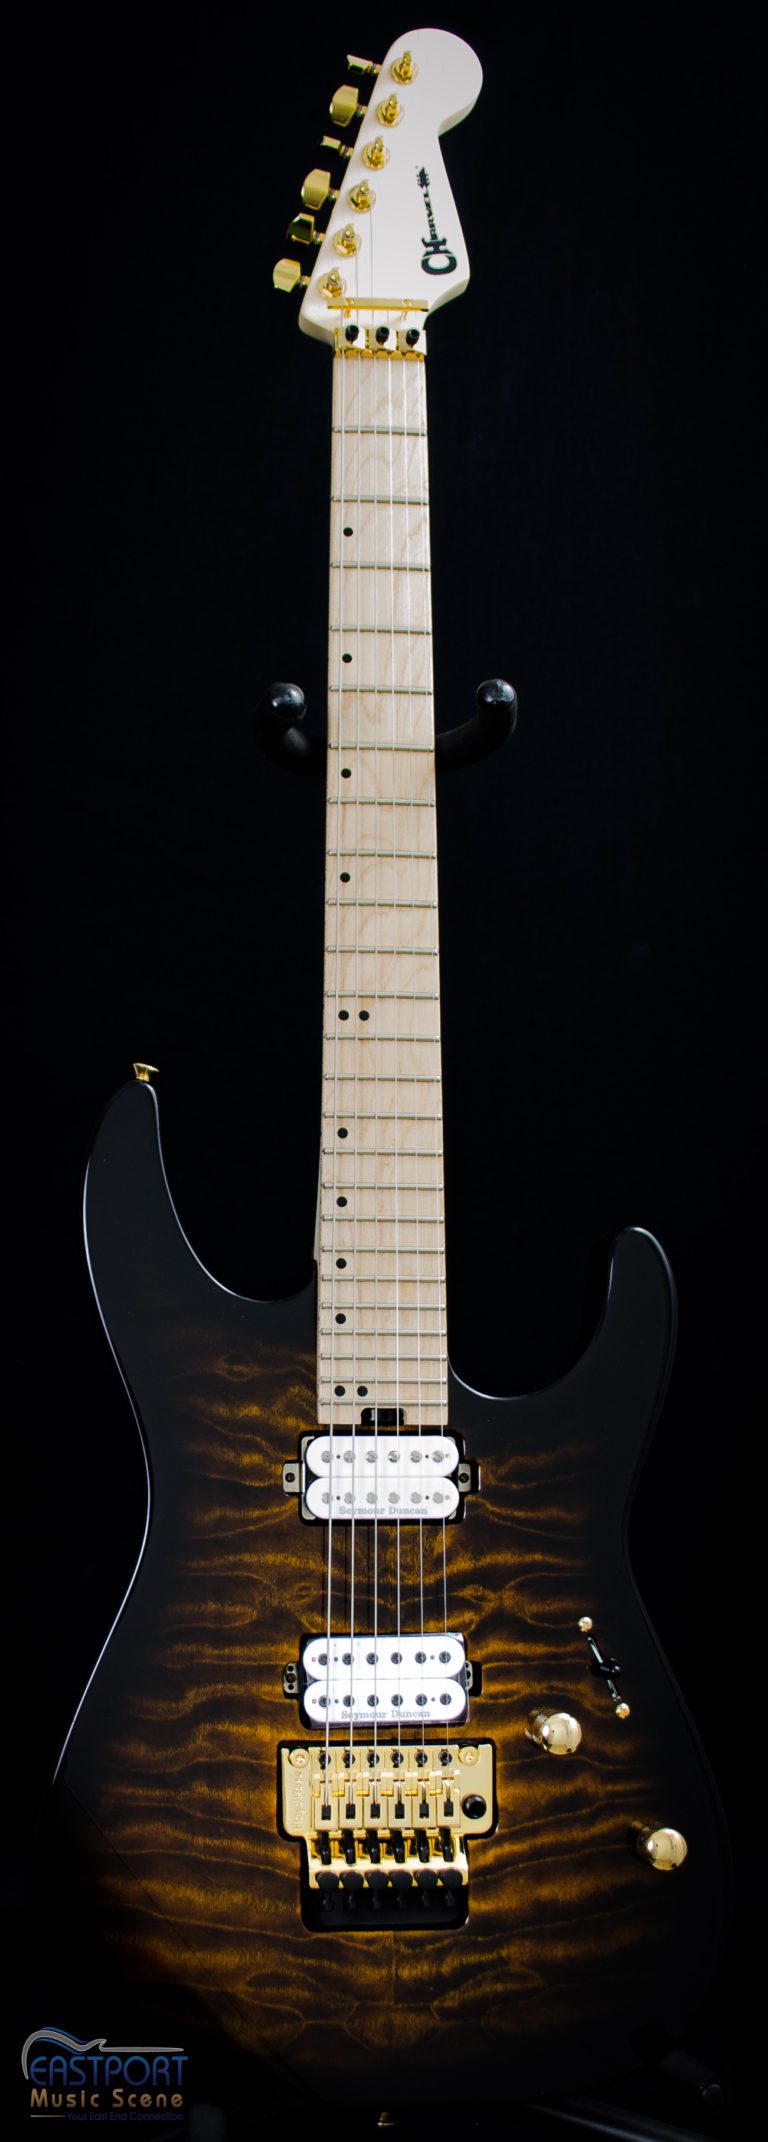 A black and brown electric guitar with the strings missing.